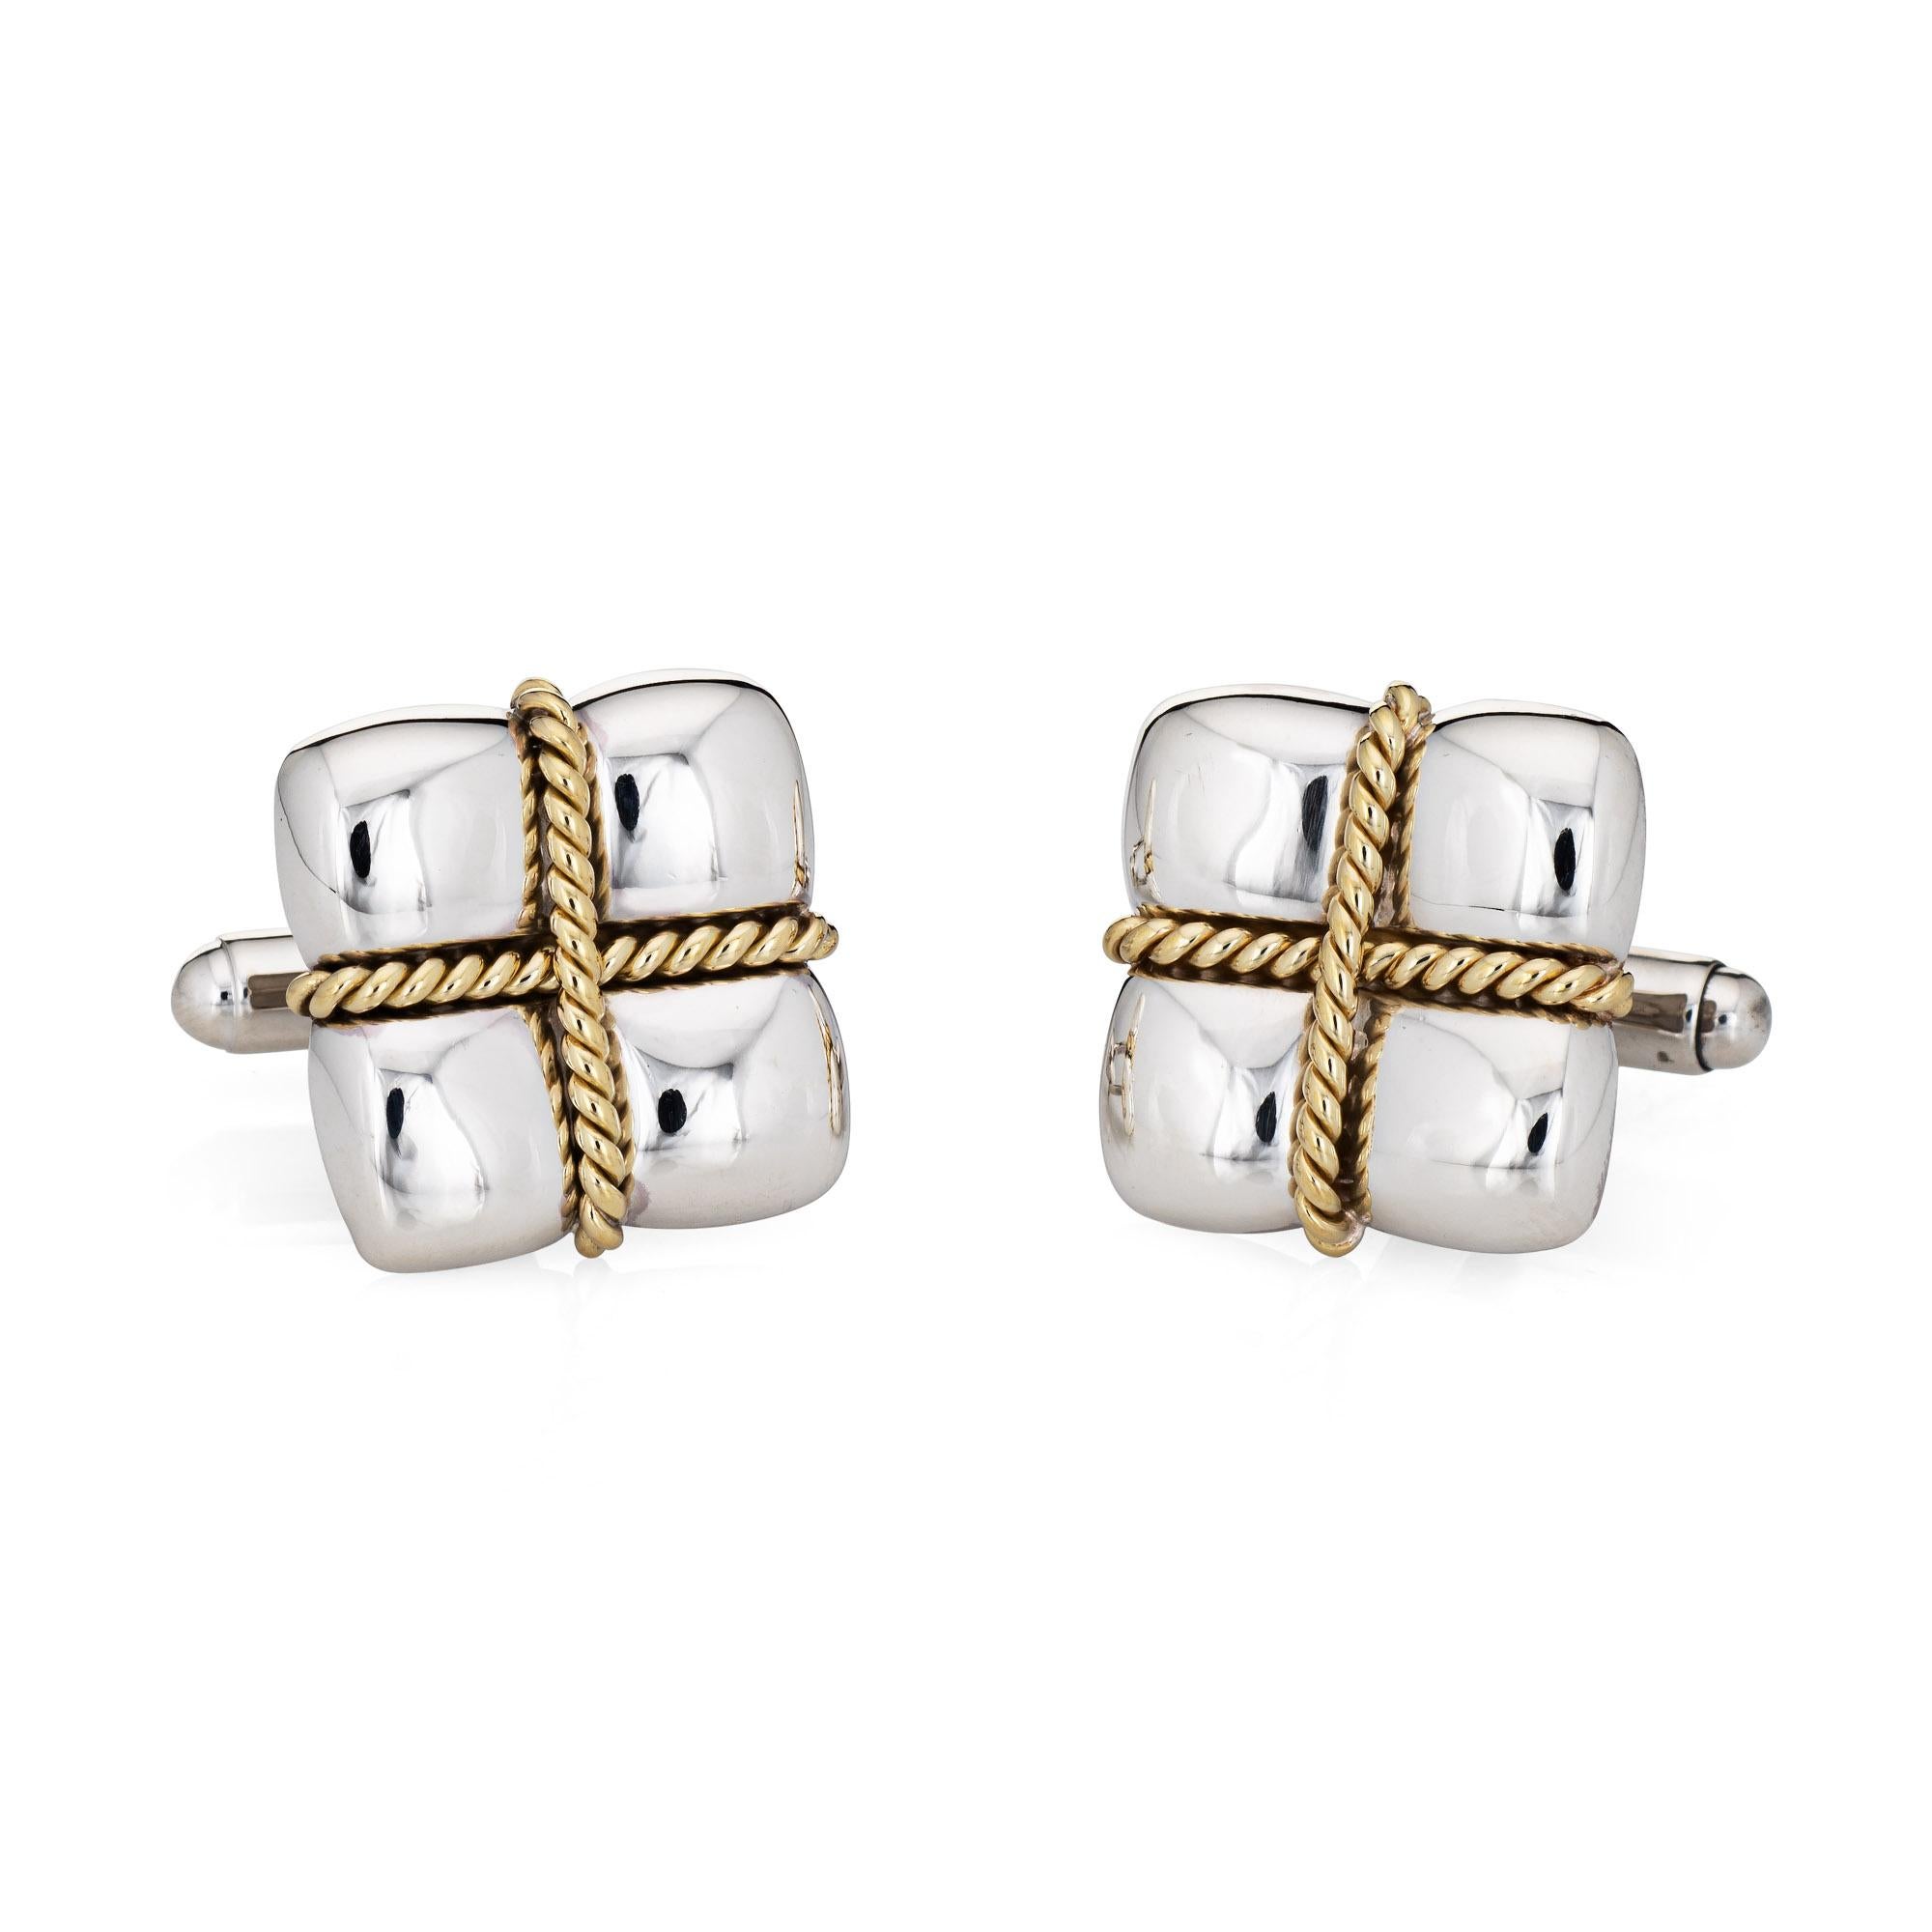 Modern Vintage Tiffany & Co Square Cufflinks Sterling Silver 18k Yellow Gold Rope